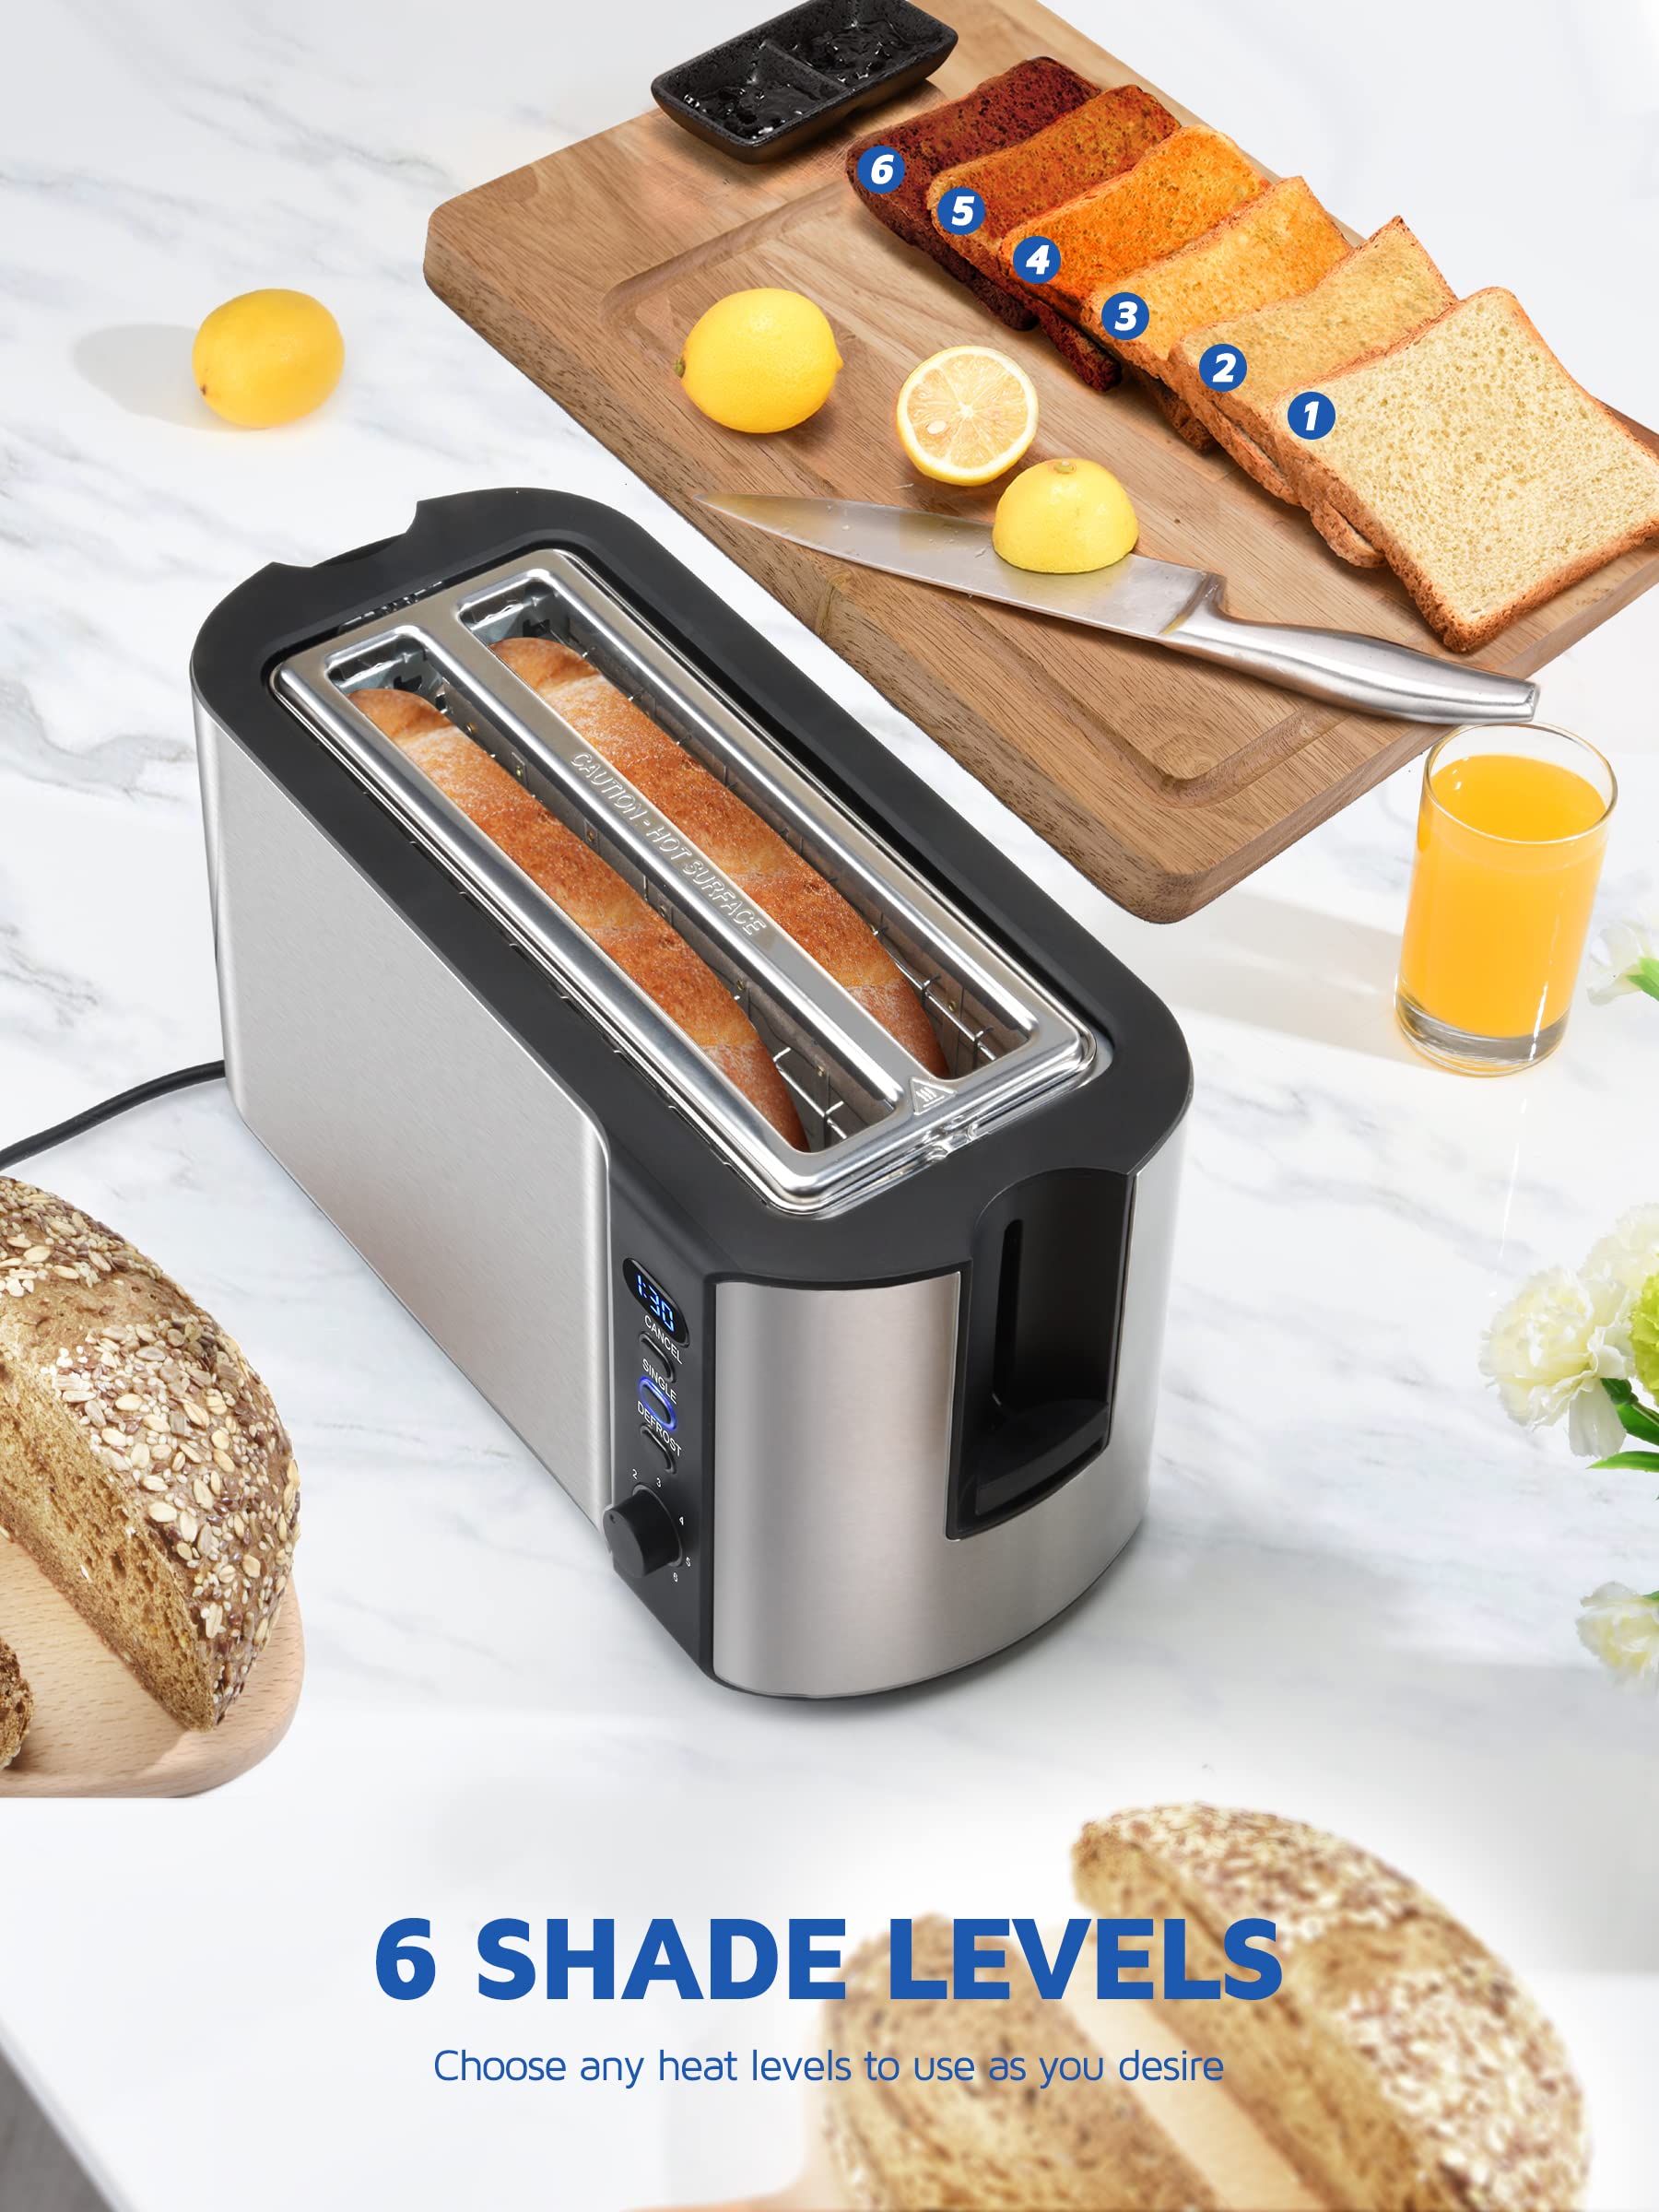 DyBaxa Stainless Steel Toaster 4 Slice Smart LED, Toaster 2 Slice Long Slot, 4 Slice Toaster Wide Slot for Bagel Sourdough Artisan Croissant Muffin, 6 Browning Control, Warming Rack, Crumb Tray